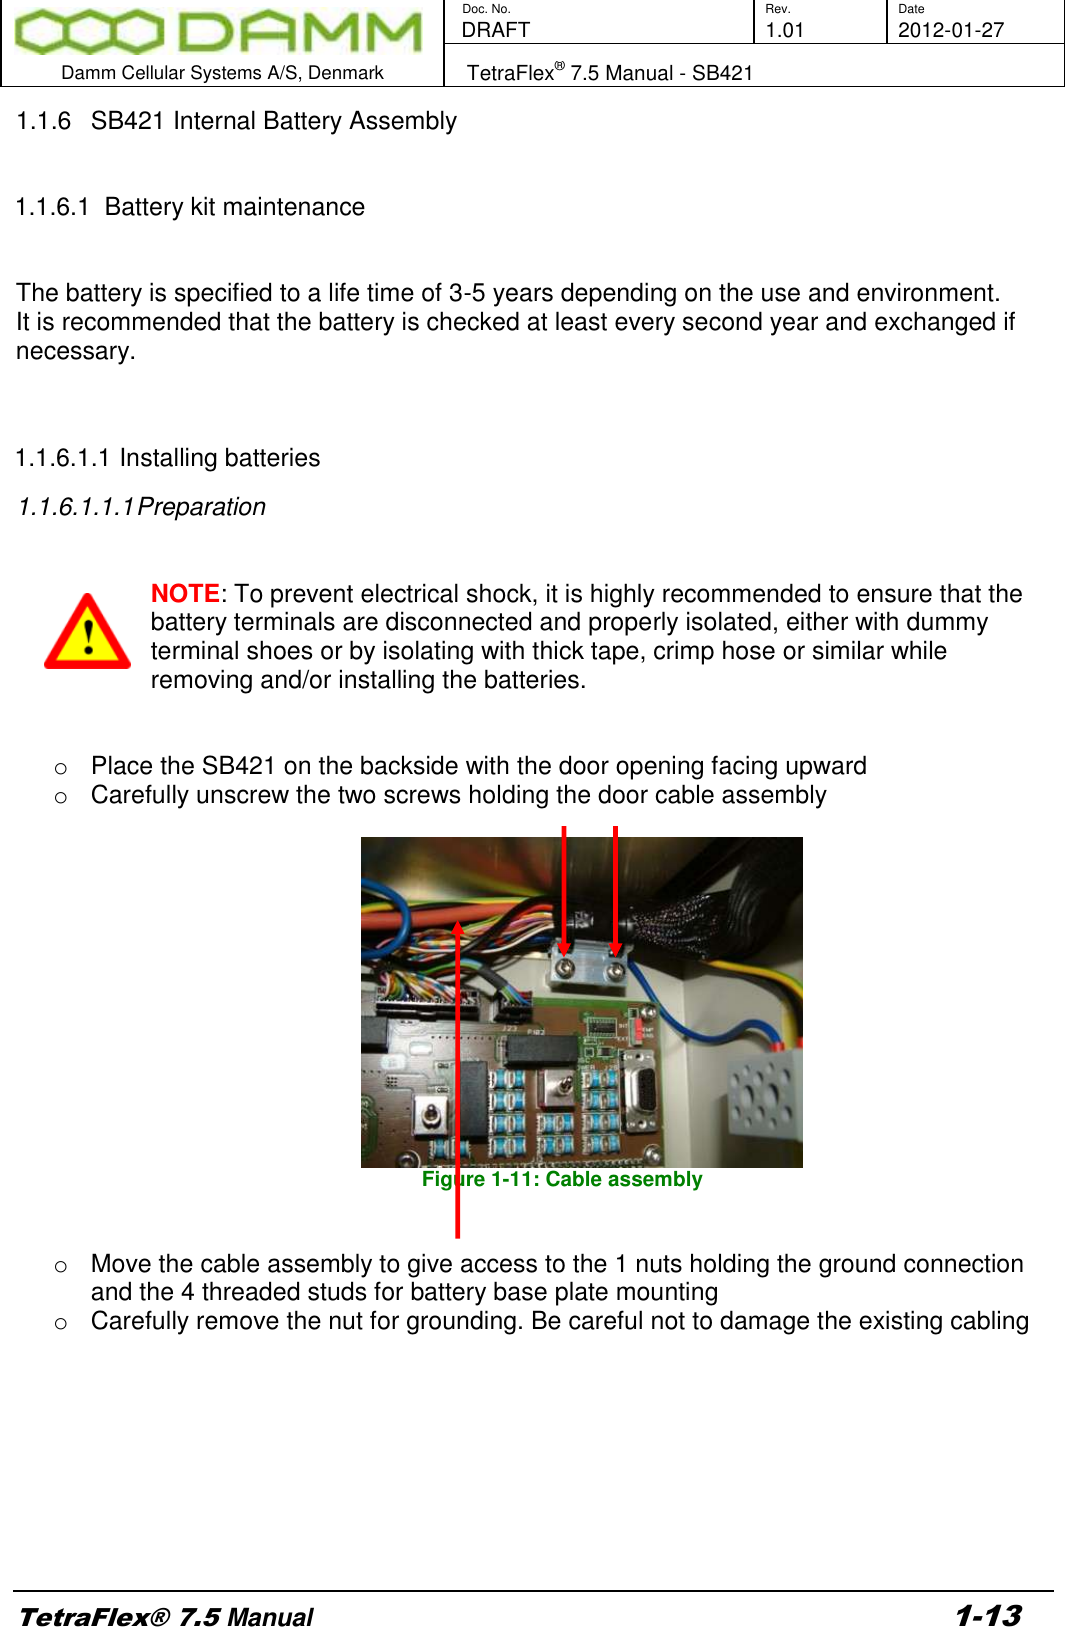        Doc. No. Rev. Date    DRAFT  1.01 2012-01-27  Damm Cellular Systems A/S, Denmark   TetraFlex® 7.5 Manual - SB421  TetraFlex® 7.5 Manual 1-13 1.1.6  SB421 Internal Battery Assembly   1.1.6.1  Battery kit maintenance    The battery is specified to a life time of 3-5 years depending on the use and environment.  It is recommended that the battery is checked at least every second year and exchanged if necessary.   1.1.6.1.1 Installing batteries 1.1.6.1.1.1 Preparation   NOTE: To prevent electrical shock, it is highly recommended to ensure that the battery terminals are disconnected and properly isolated, either with dummy terminal shoes or by isolating with thick tape, crimp hose or similar while removing and/or installing the batteries.   o  Place the SB421 on the backside with the door opening facing upward o  Carefully unscrew the two screws holding the door cable assembly   Figure 1-11: Cable assembly   o  Move the cable assembly to give access to the 1 nuts holding the ground connection and the 4 threaded studs for battery base plate mounting o  Carefully remove the nut for grounding. Be careful not to damage the existing cabling         